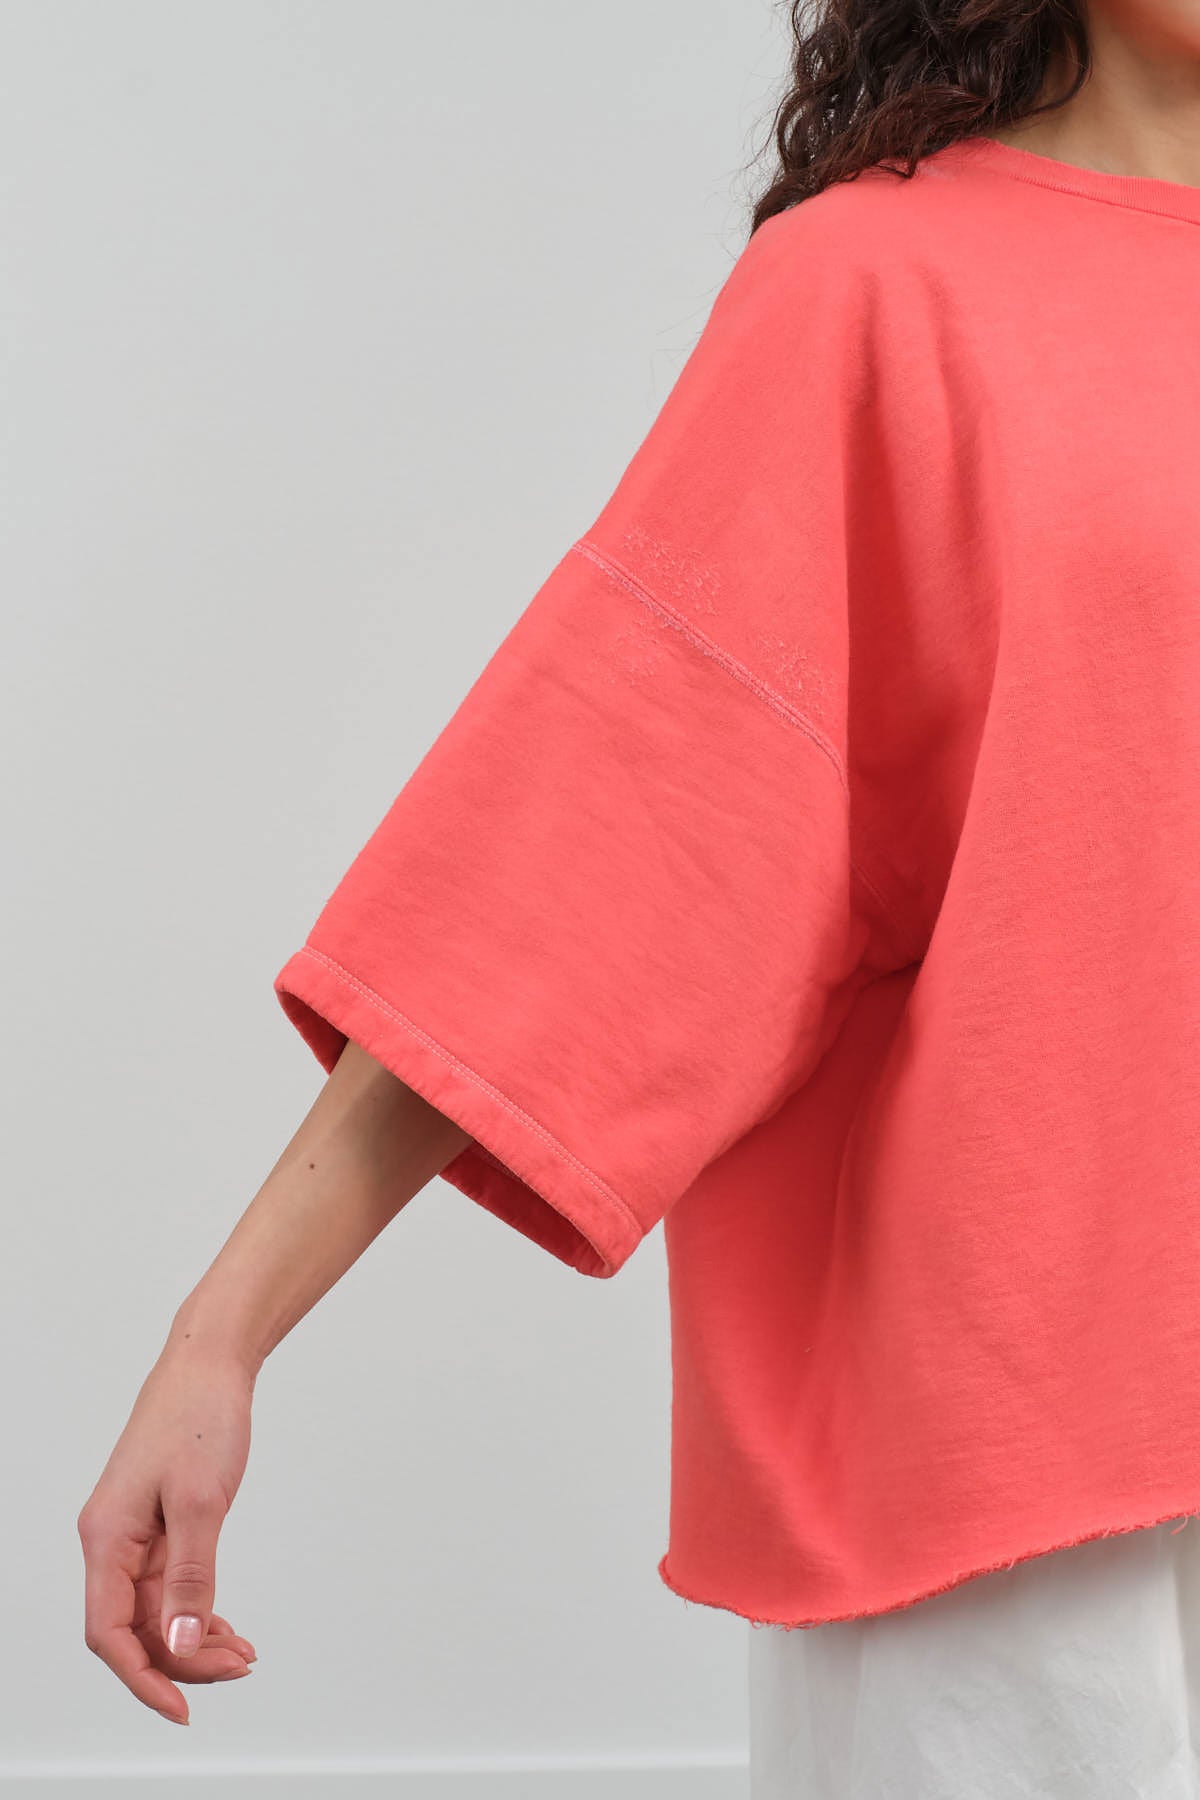 Sleeve view of Fondly Sweatshirt in Guava